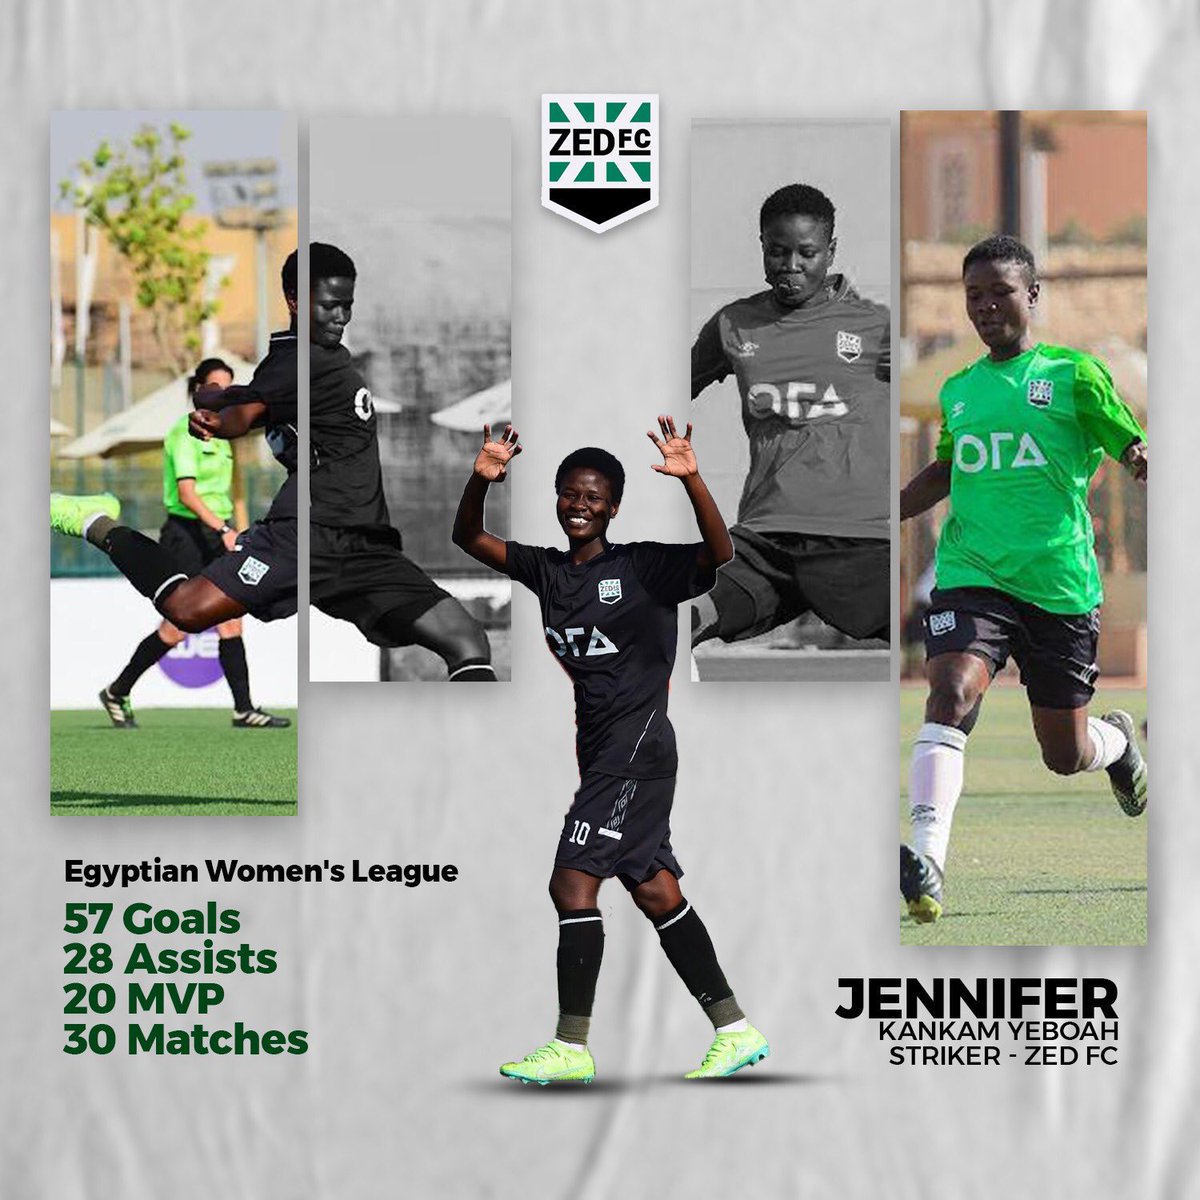 #GhanaiansAbroad 

Jennifer Kankam Yeboah finished this season as Egyptian League Golden boot winner with 57 Goals in 30 Matches. 

She also has  28 assists and 20POTM Awards. 

What an incredible season you’ve had @JenniferKankam3 💯🌟